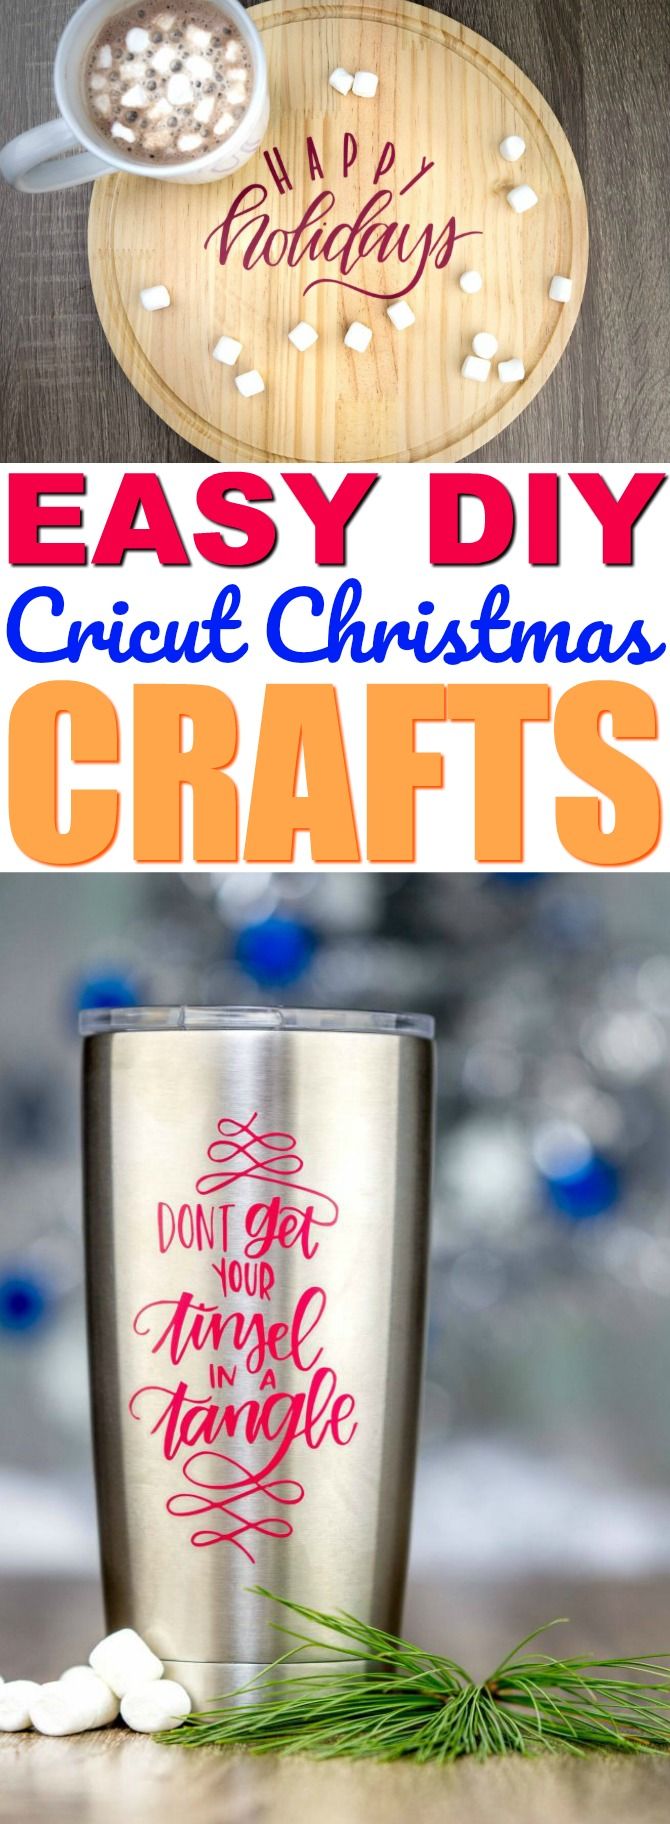 Today I want to share a ton of our favorite Easy DIY Cricut Christmas Crafts th...